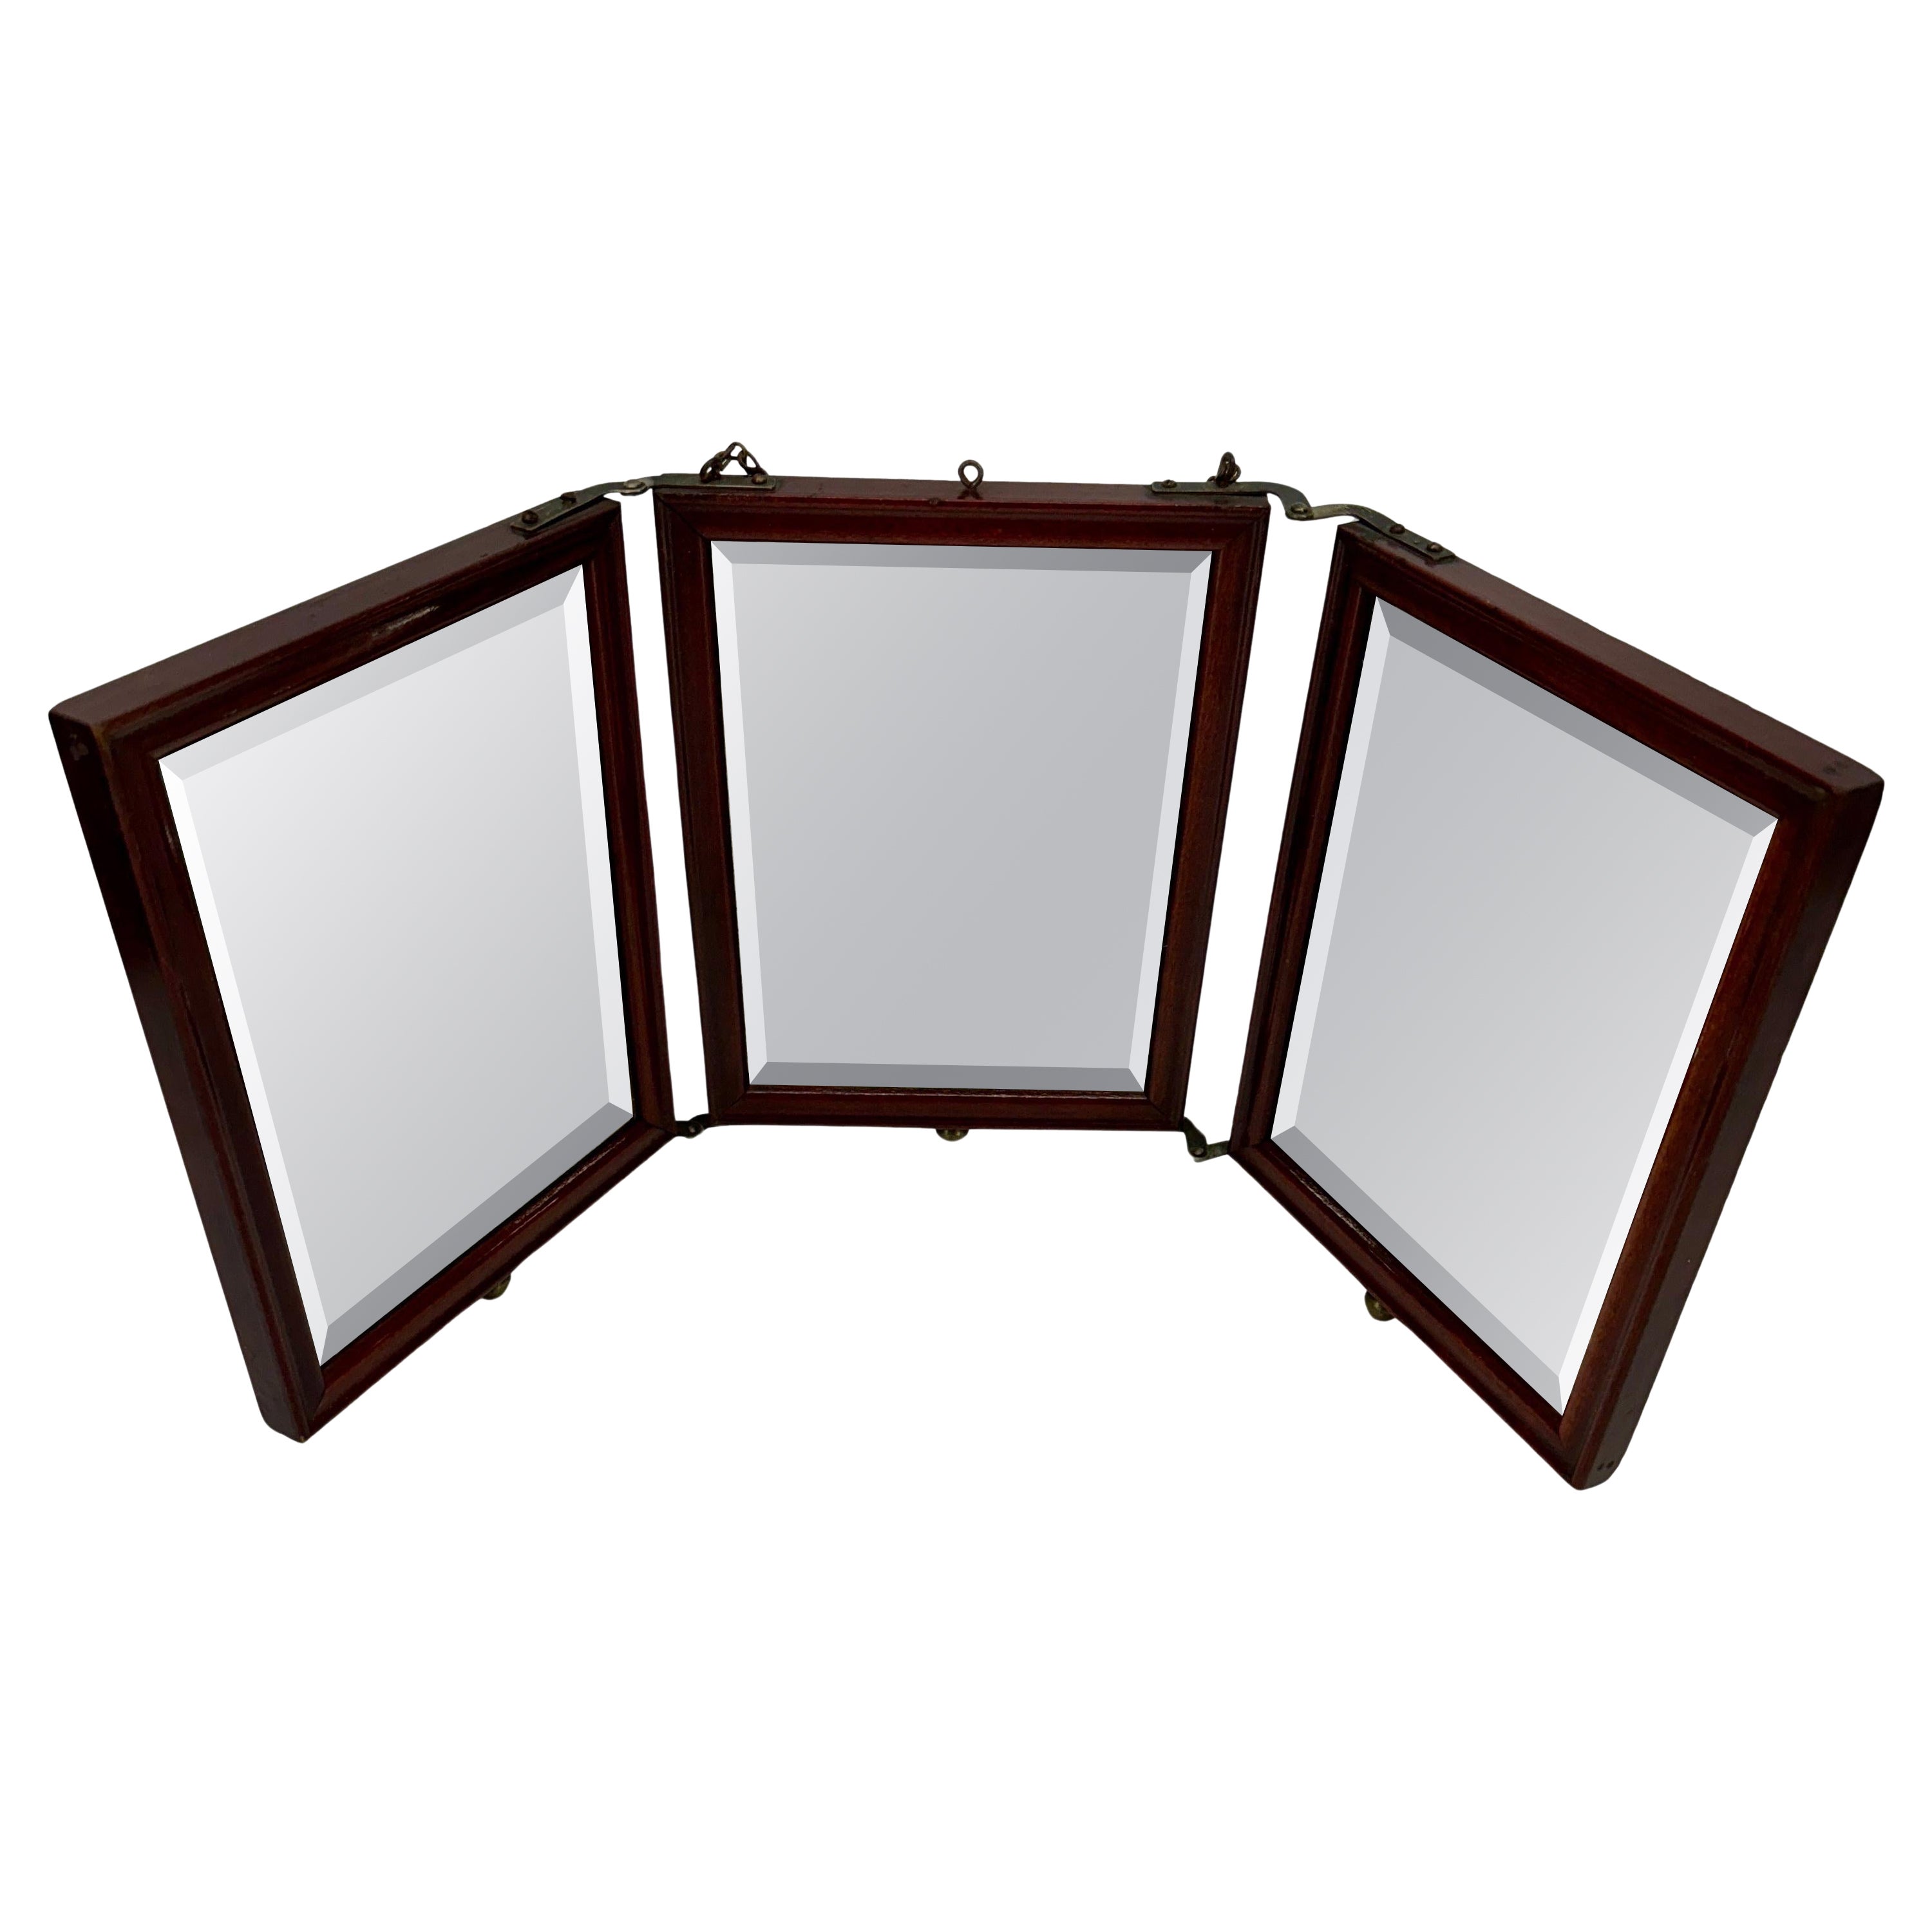 Tri-Fold Travel Vanity Or Dresser Mirror With Beveled Glass